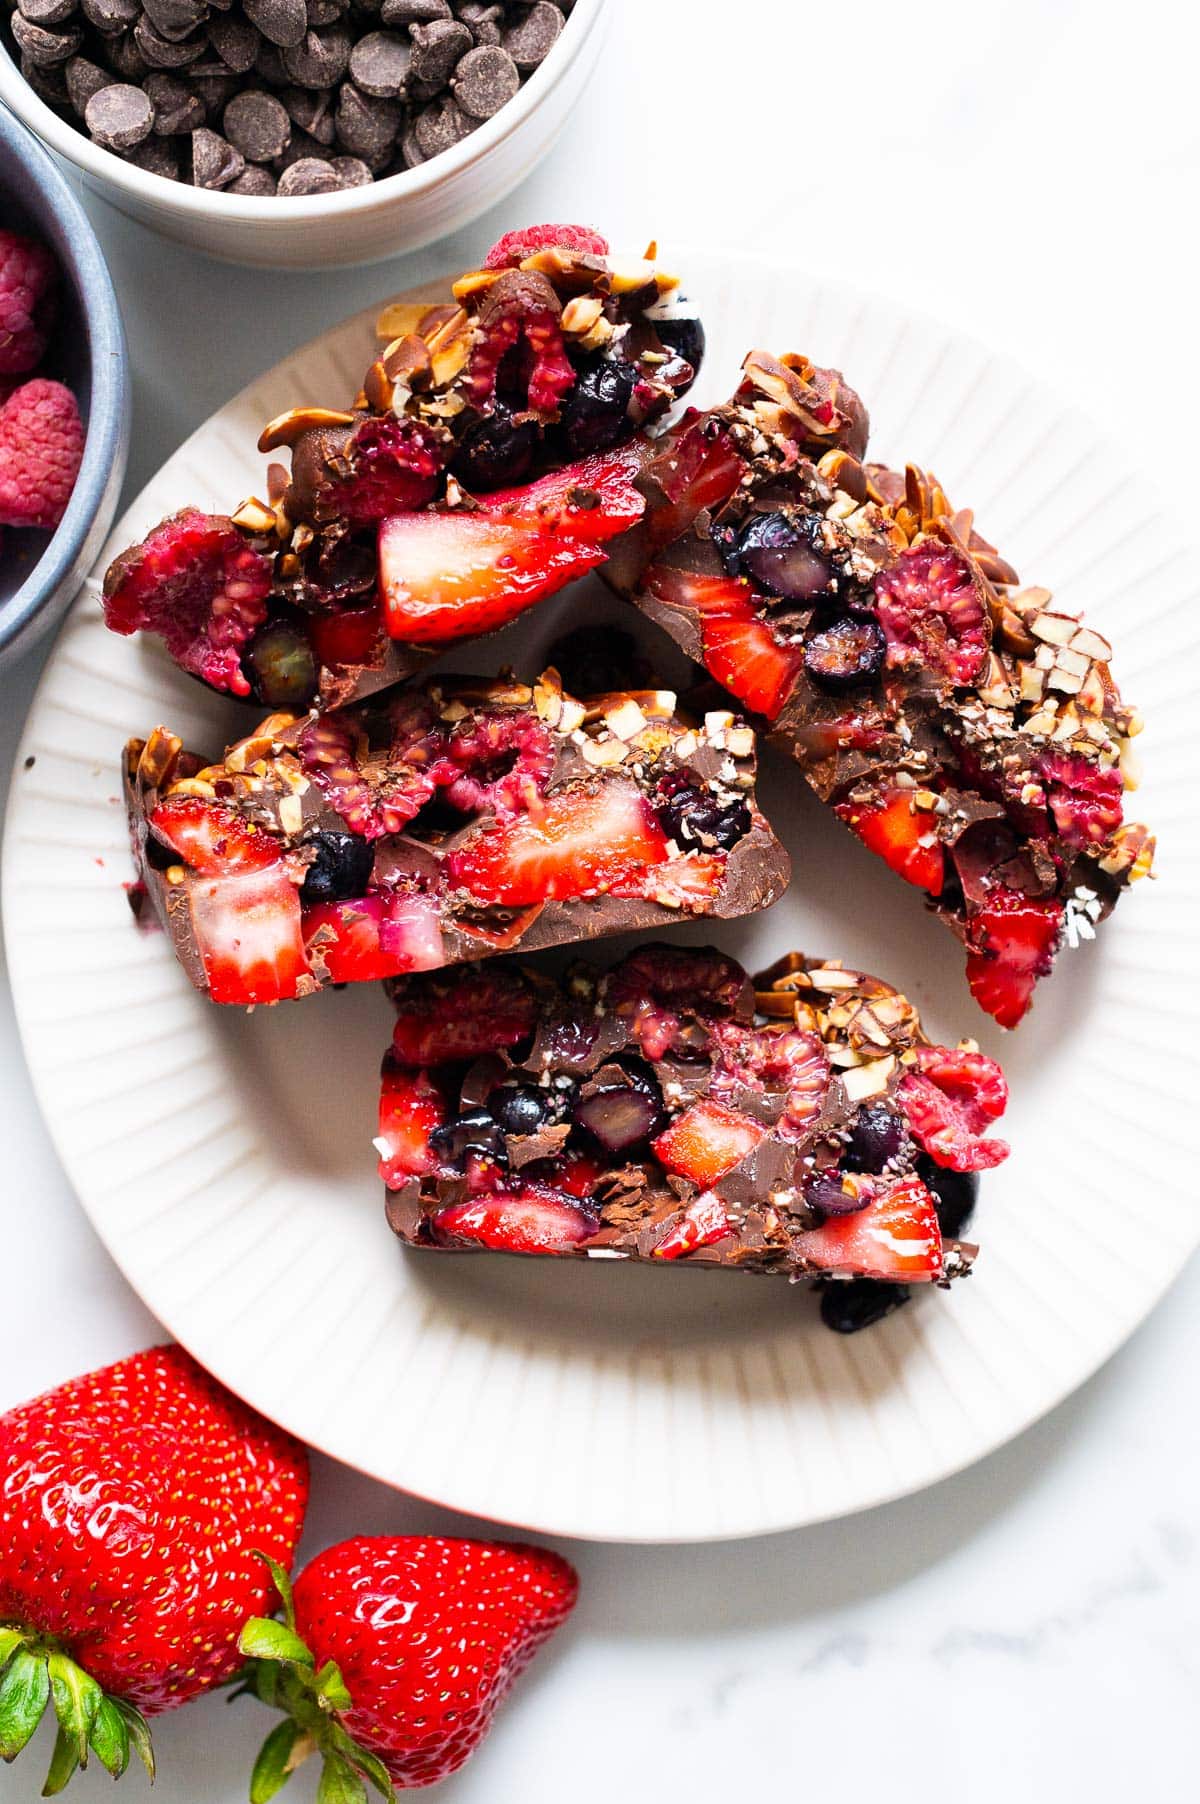 Four chocolate berry bars on a plate. Chocolate chips, raspberries and strawberries on the counter.